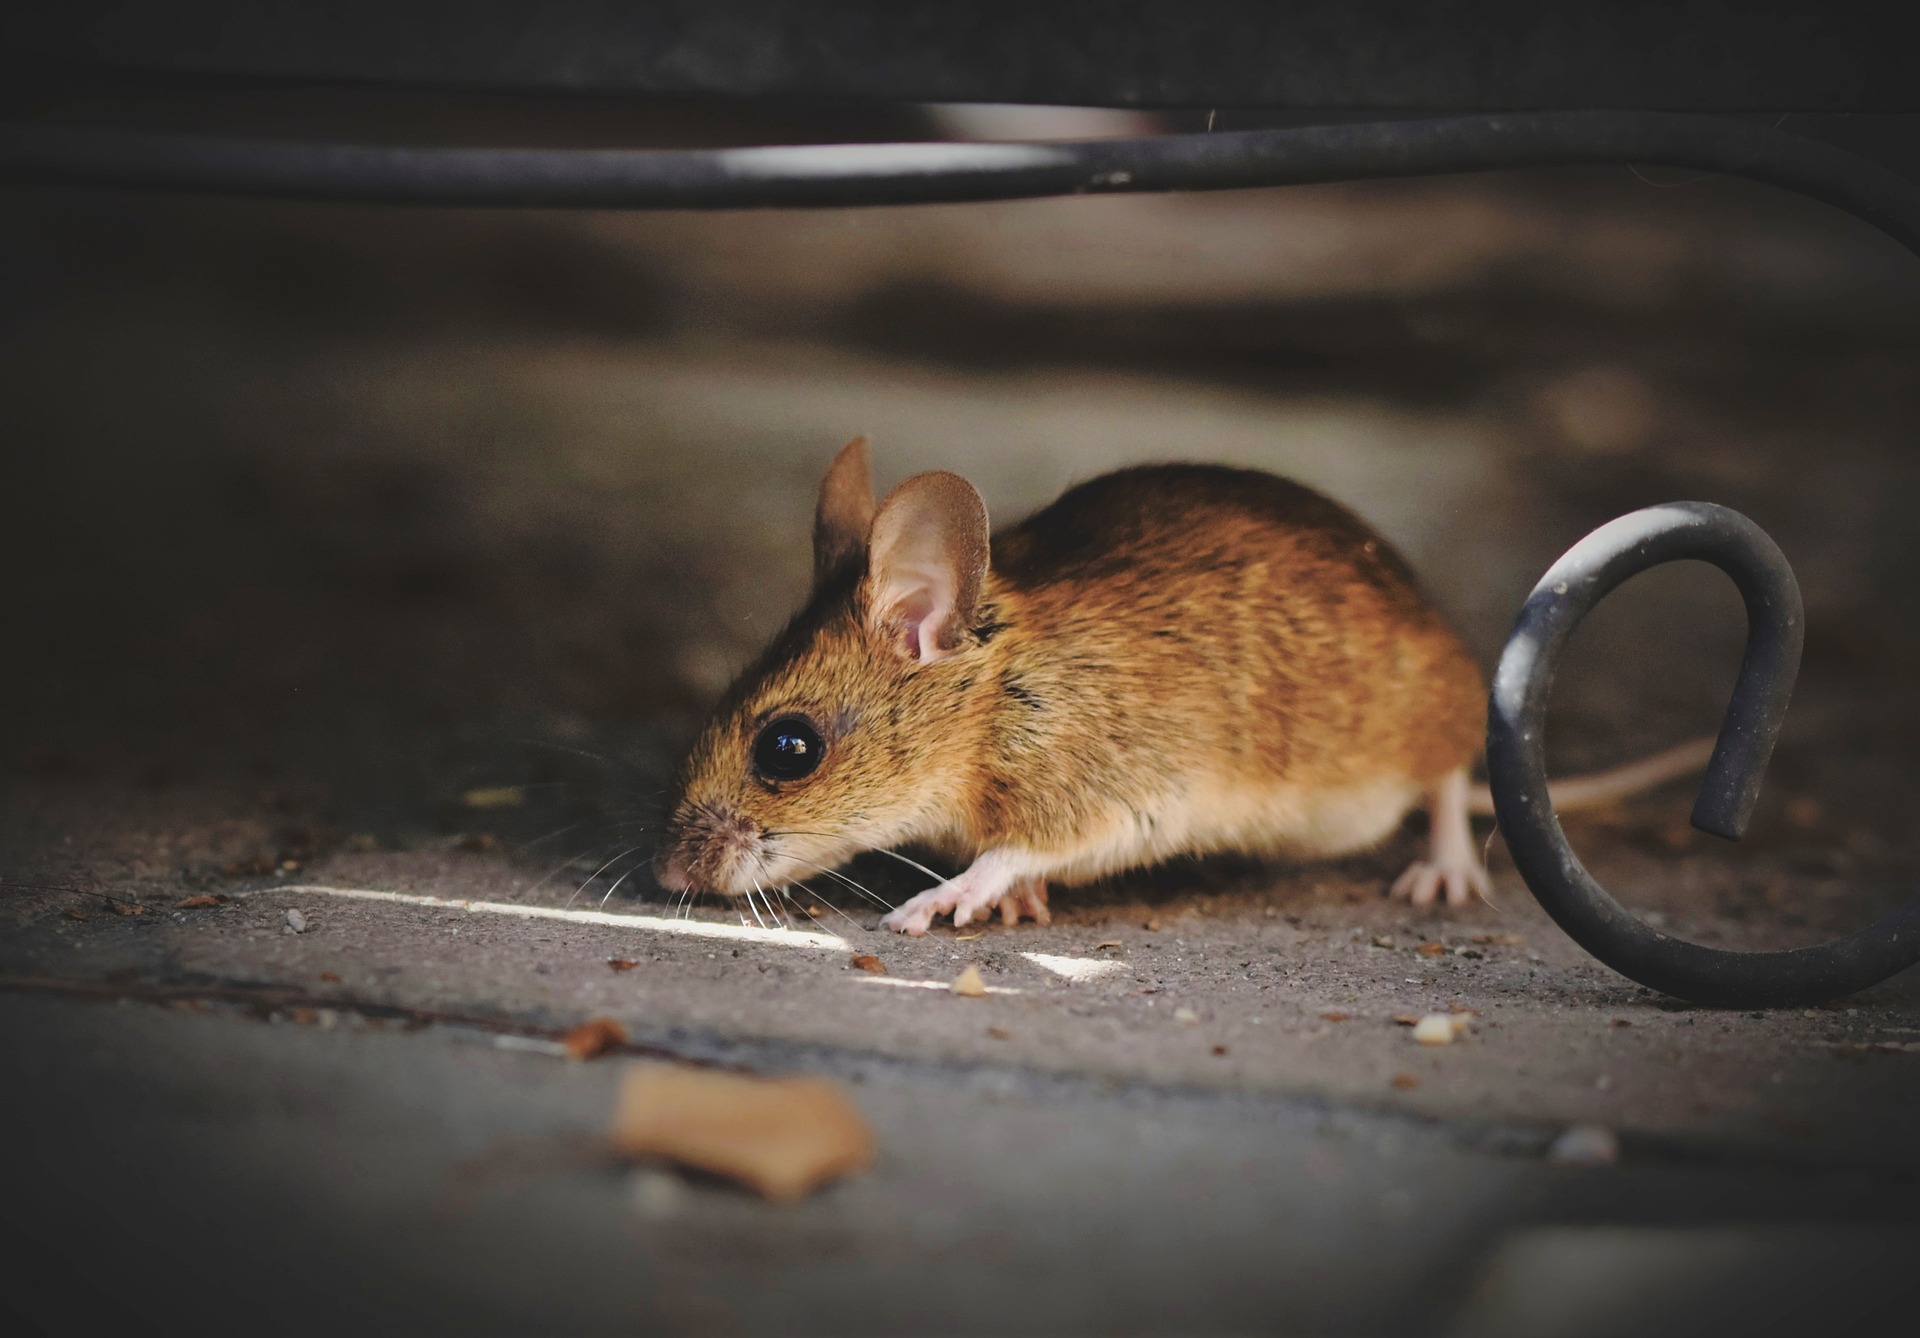 House mouse - common winter pests